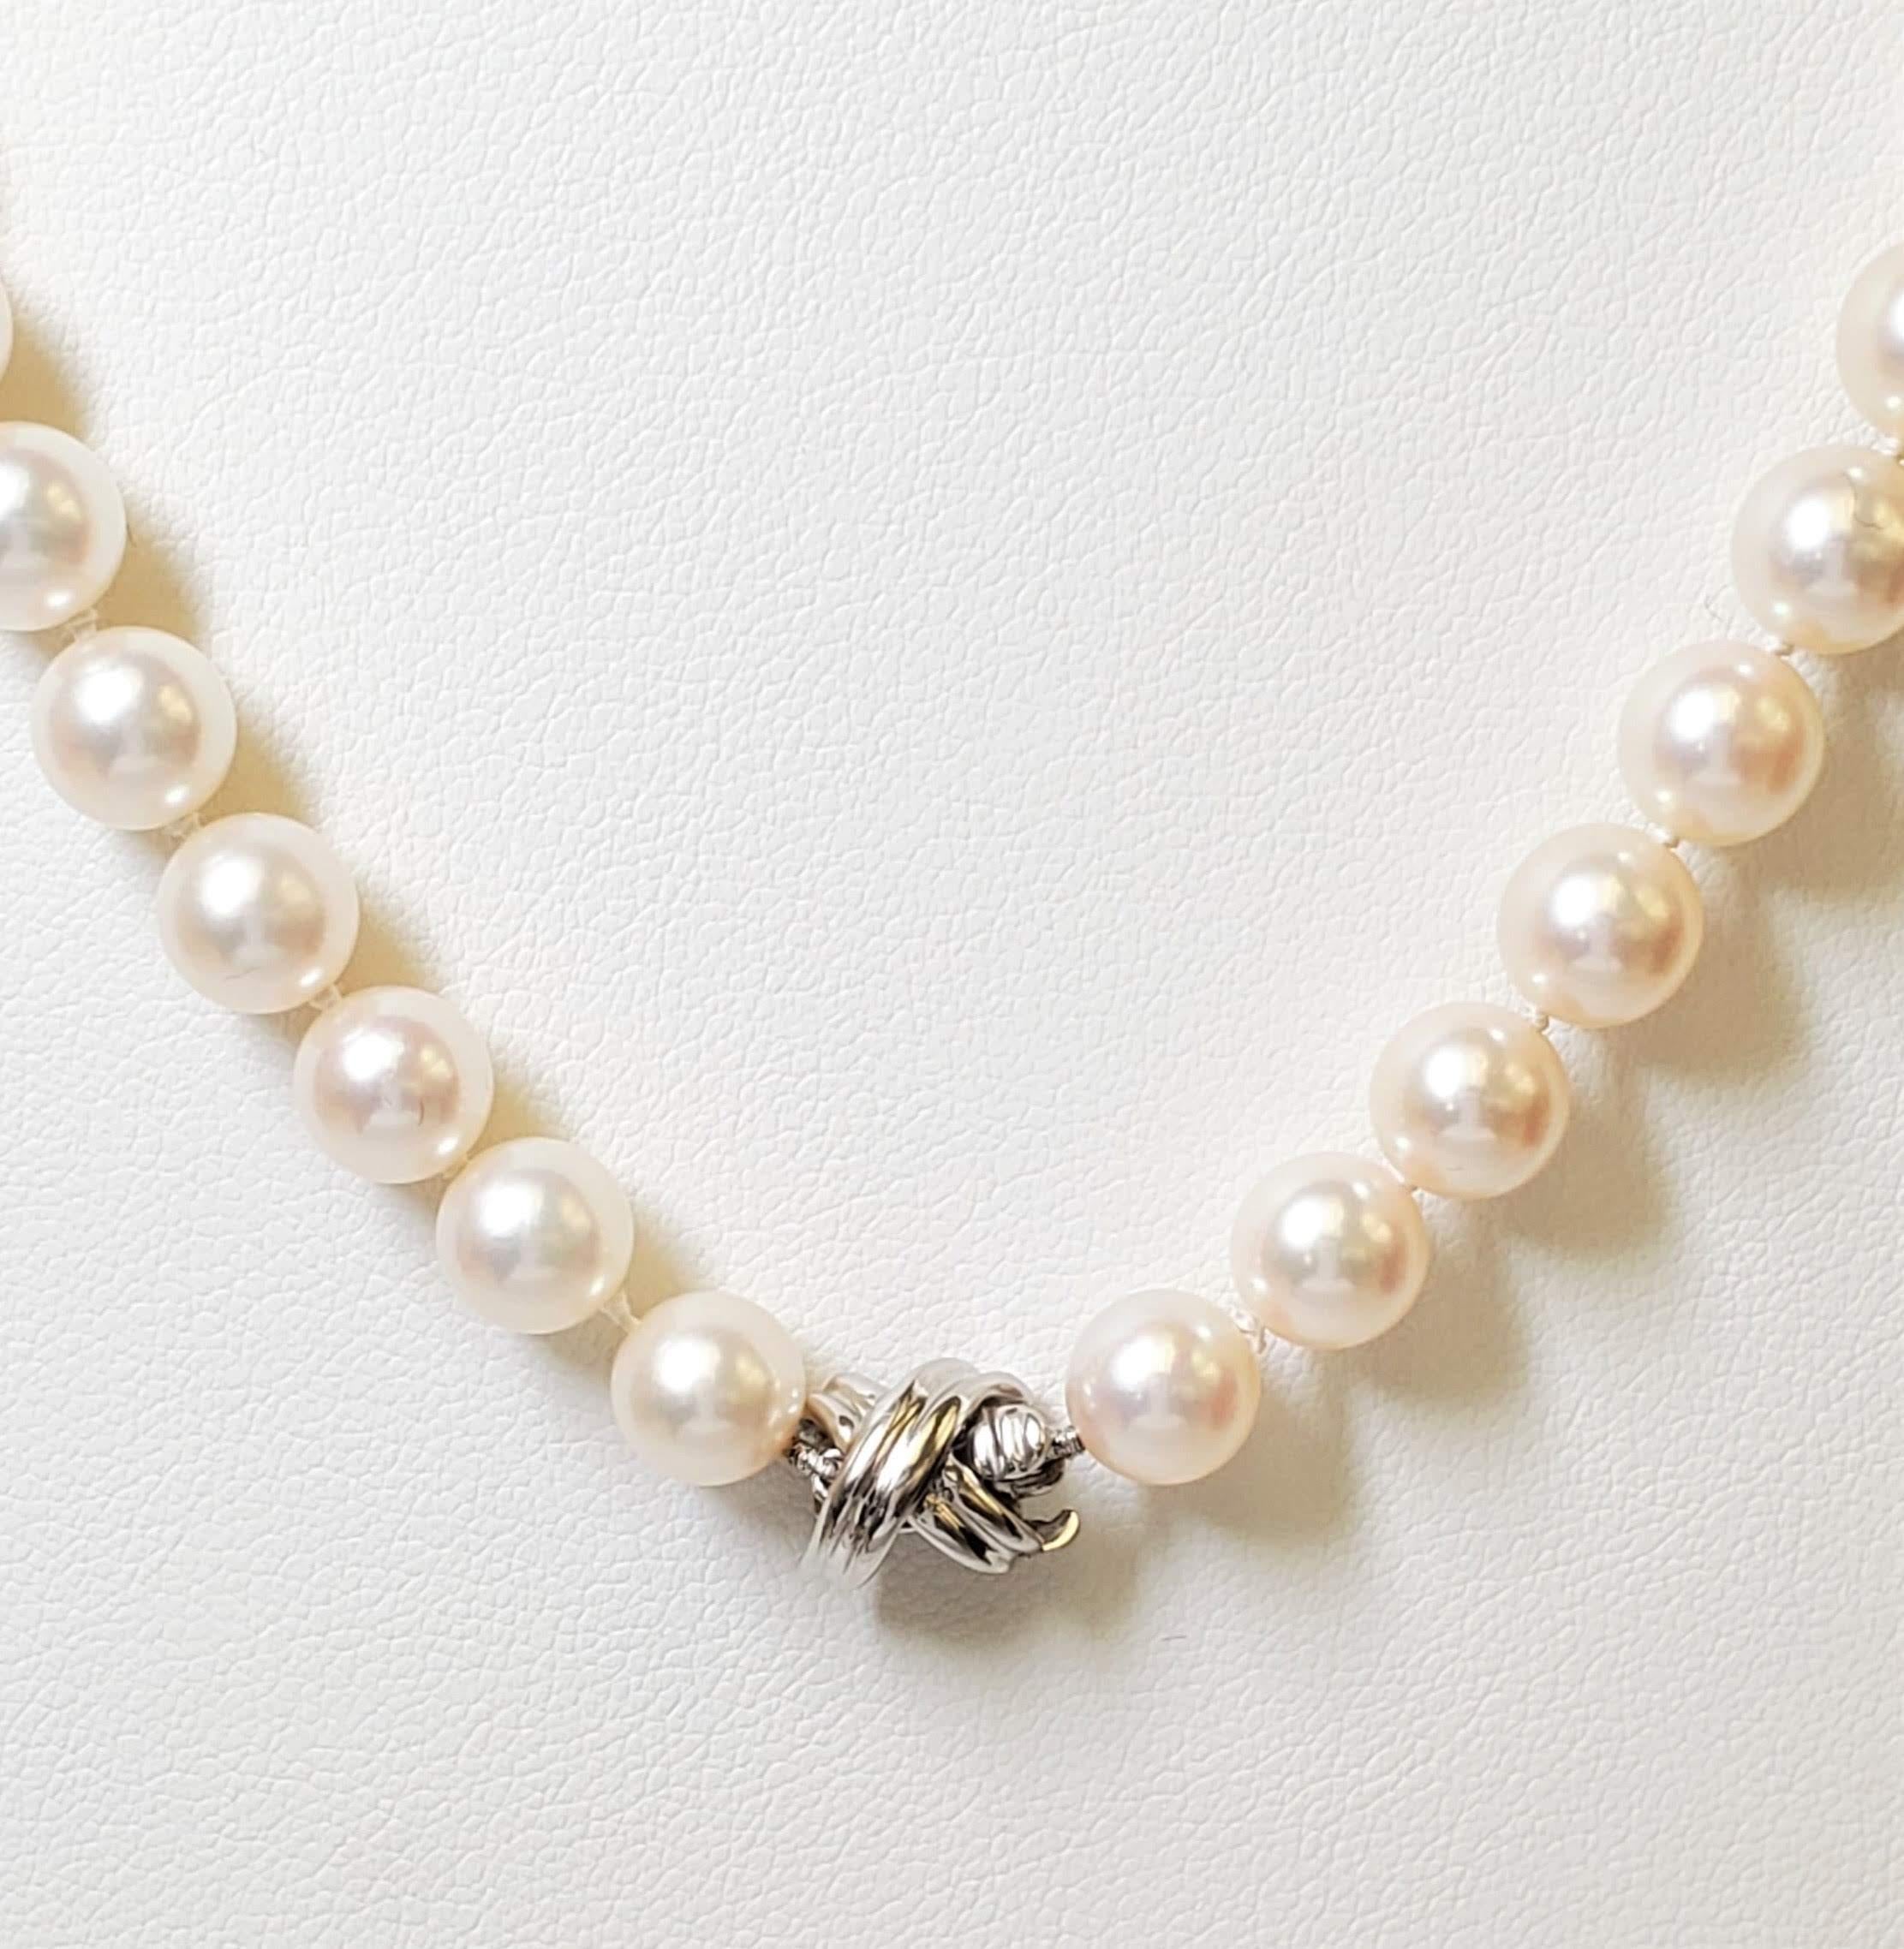 Classic Tiffany & Co. pearl necklace with platinum signature 'X' clasp. The pearls measure and estimated 7.4mm each and the necklace is 30 1/2 inches in length. Clasp is signed T&Co., PT950. The necklace is presented with original Tiffany folder, no